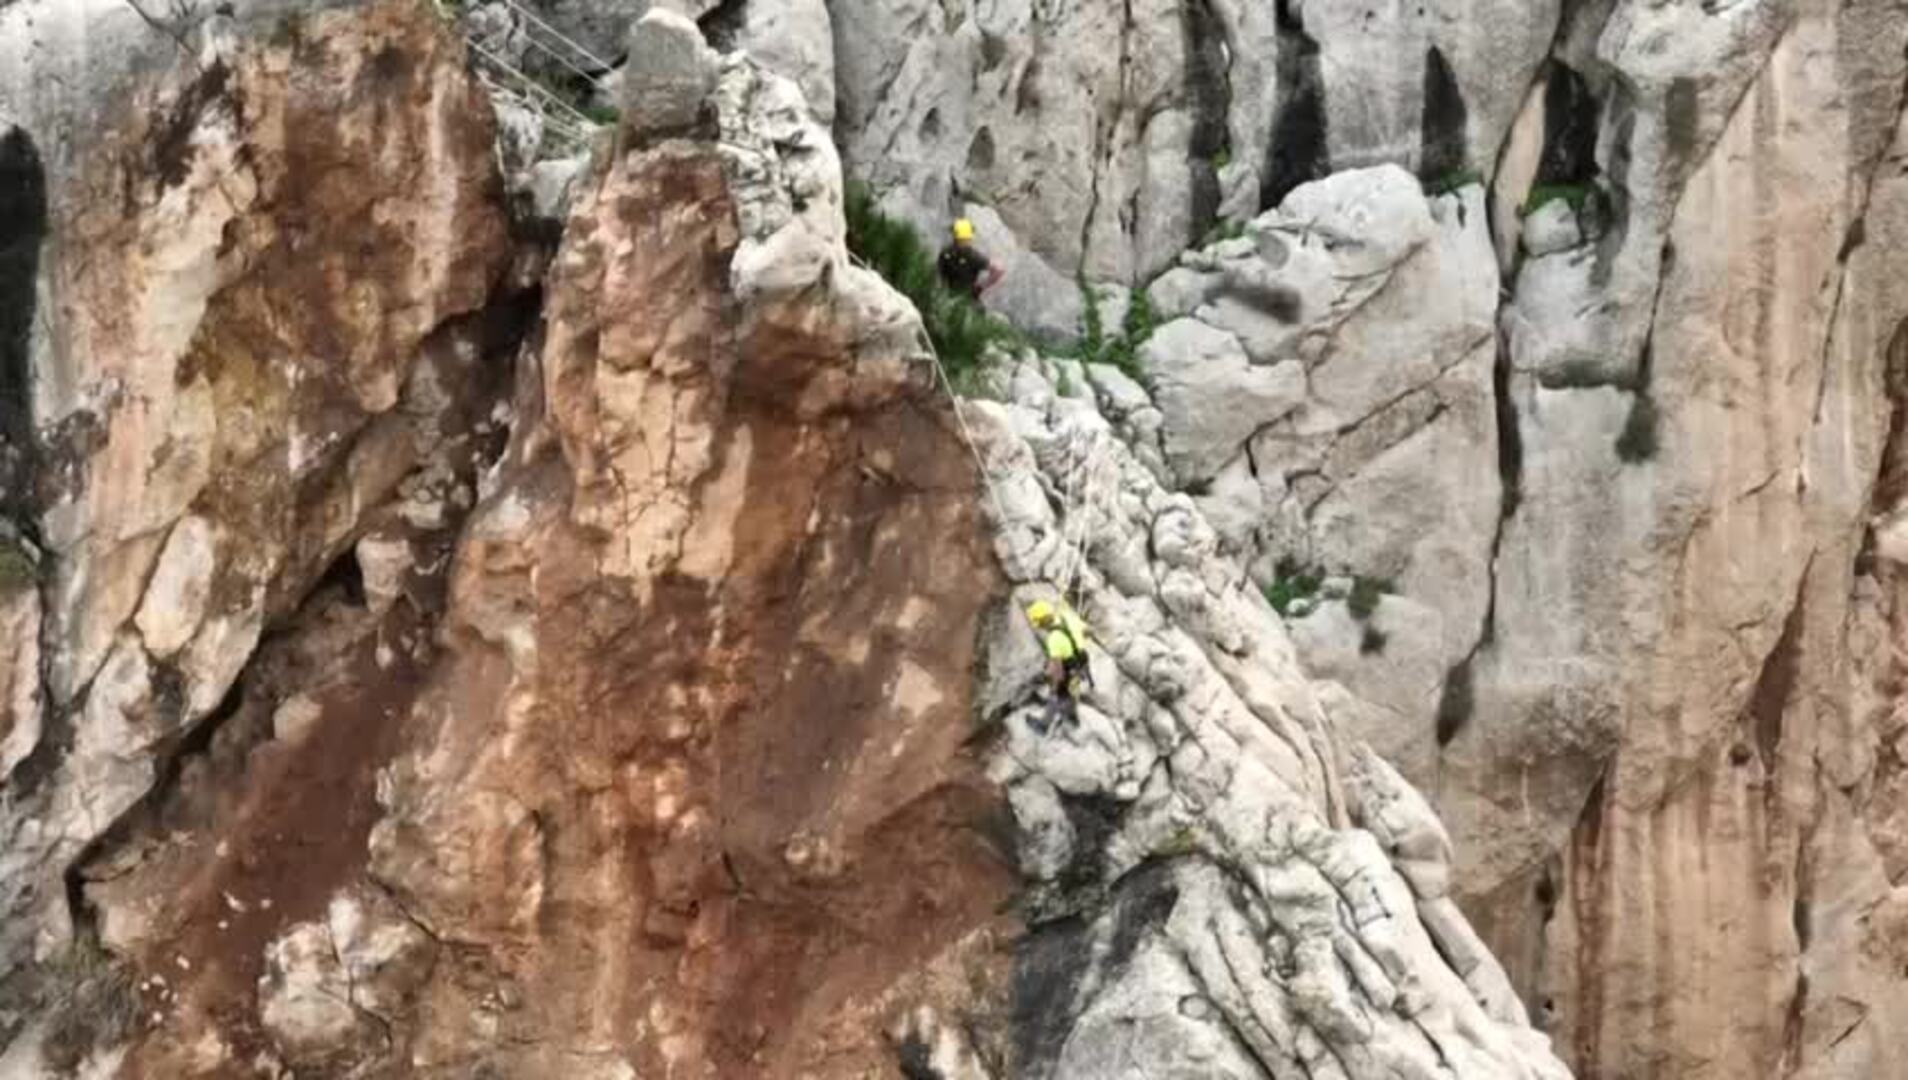 Workers aim to repair damaged section of Caminito del Rey suspended walkway in just three days following landslide